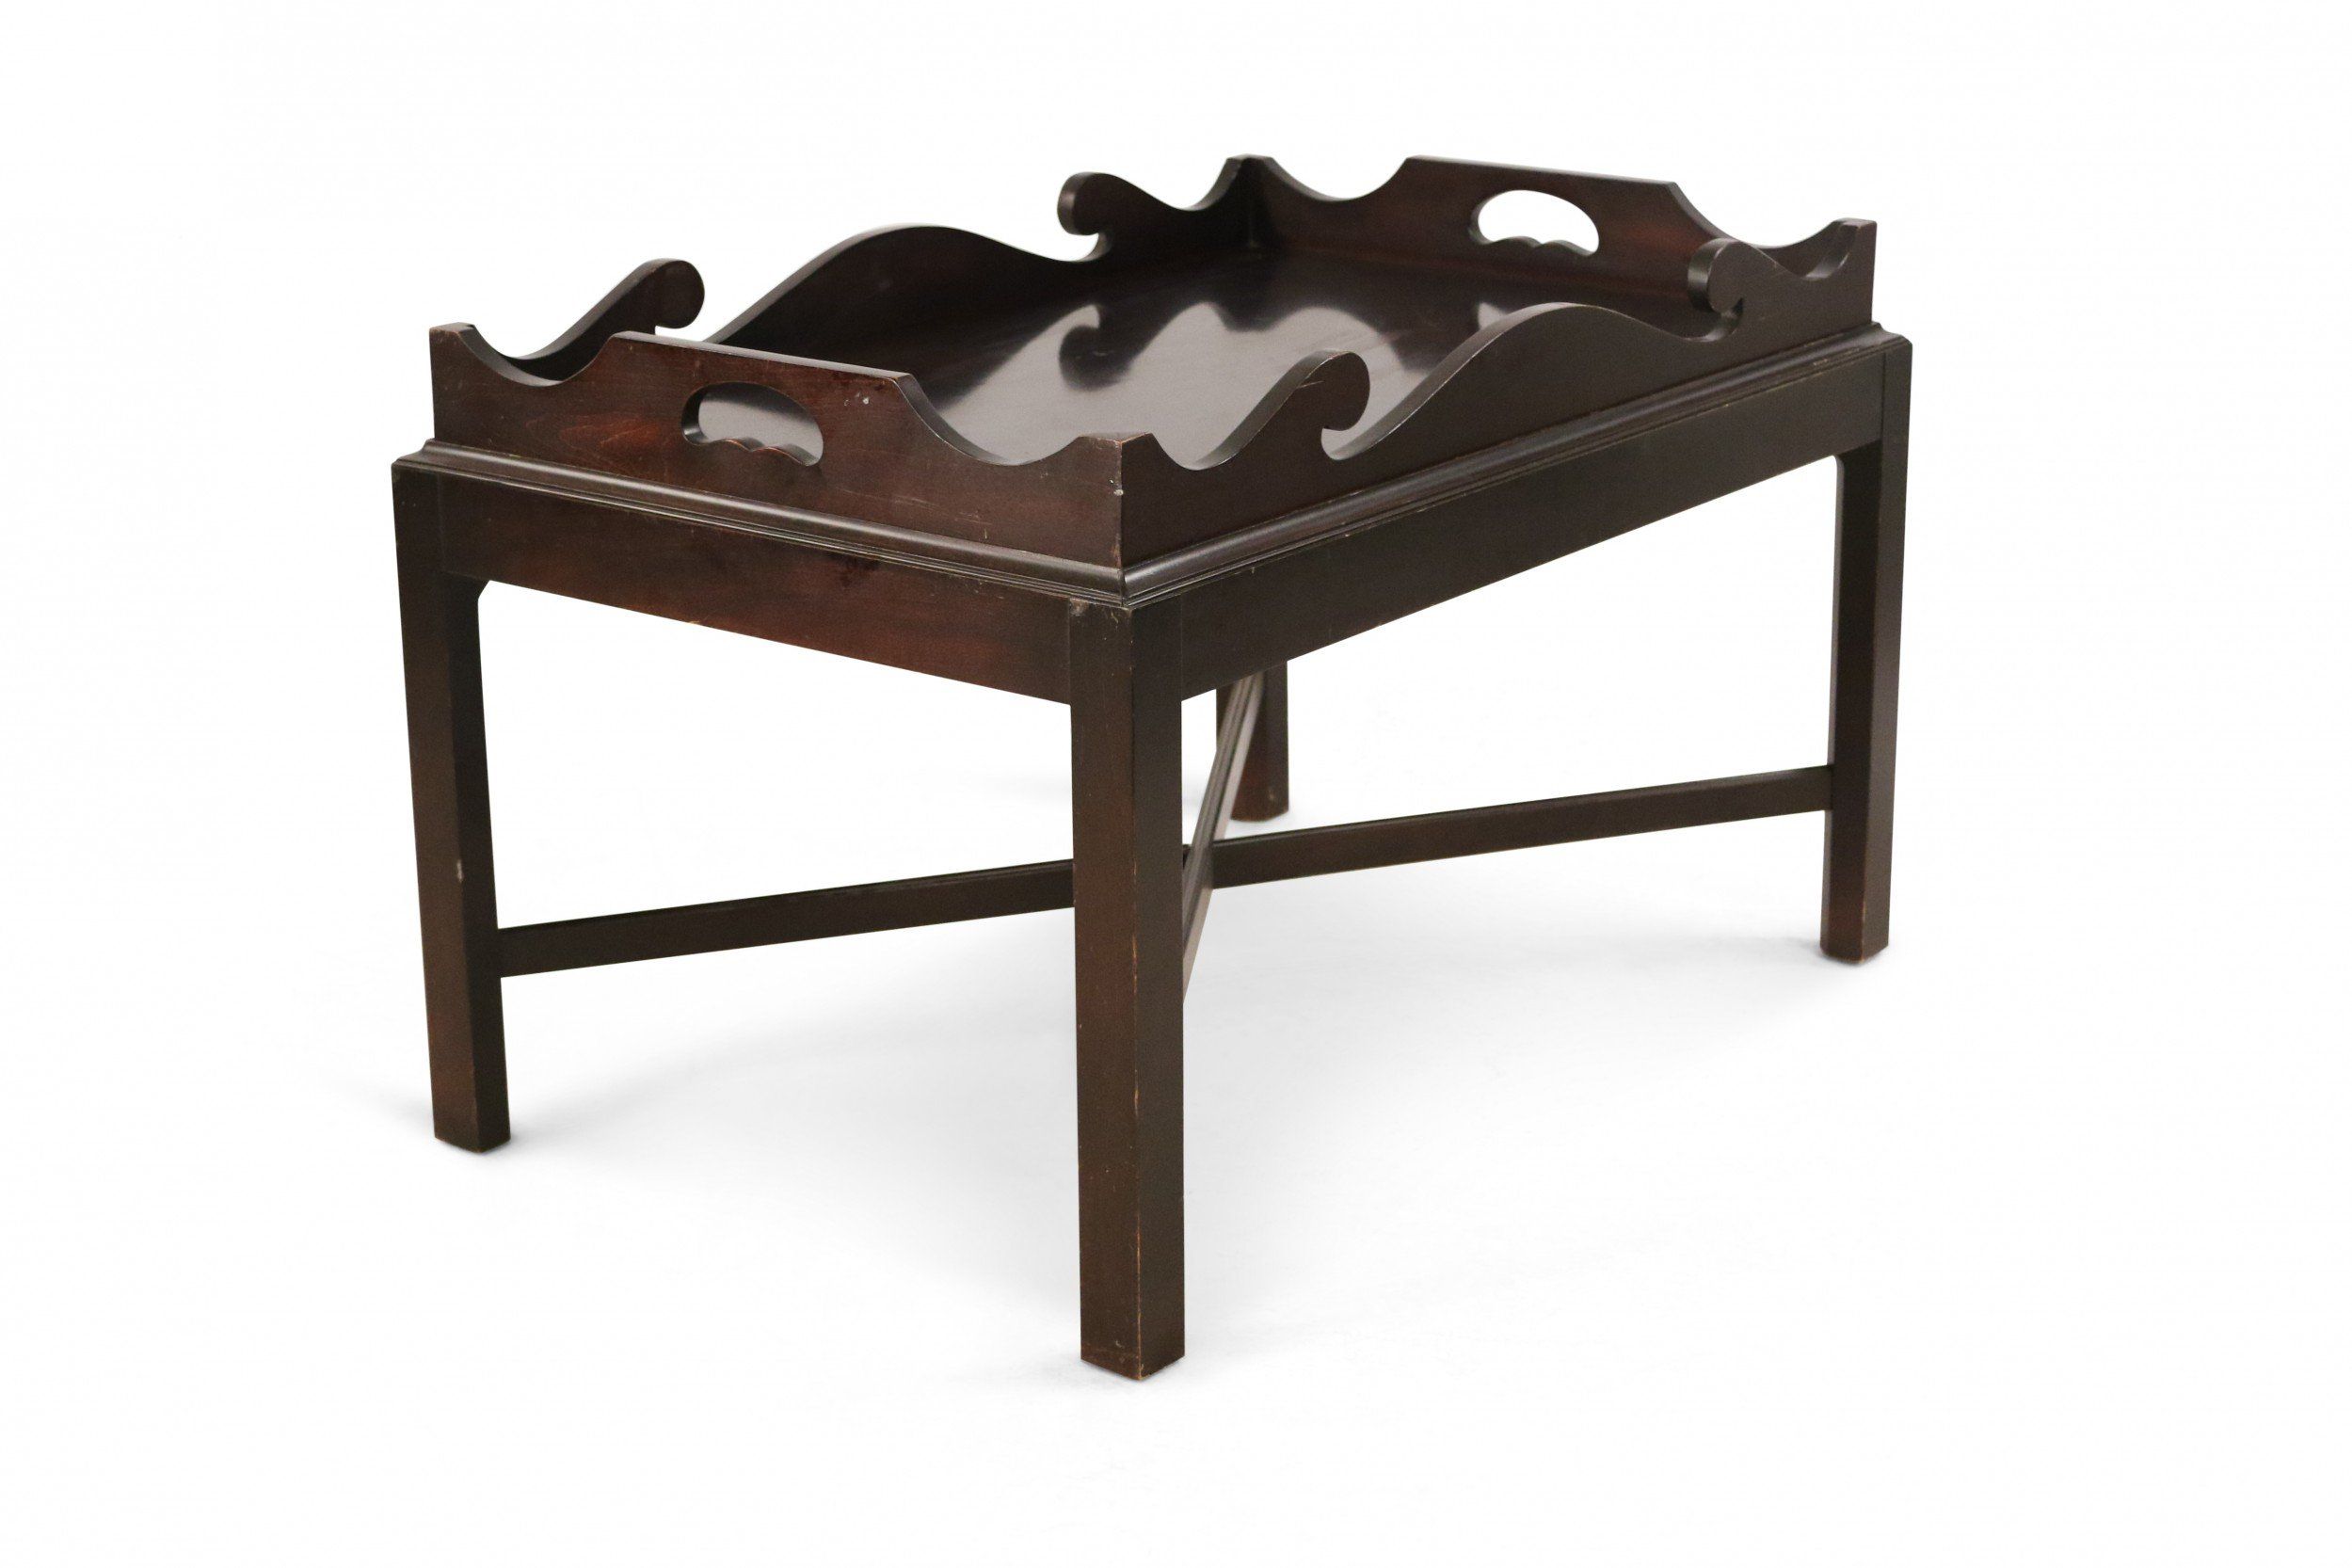 Contemporary Dark Wood Removable Tray Top Coffee Table Throughout Detachable Tray Coffee Tables (View 15 of 15)